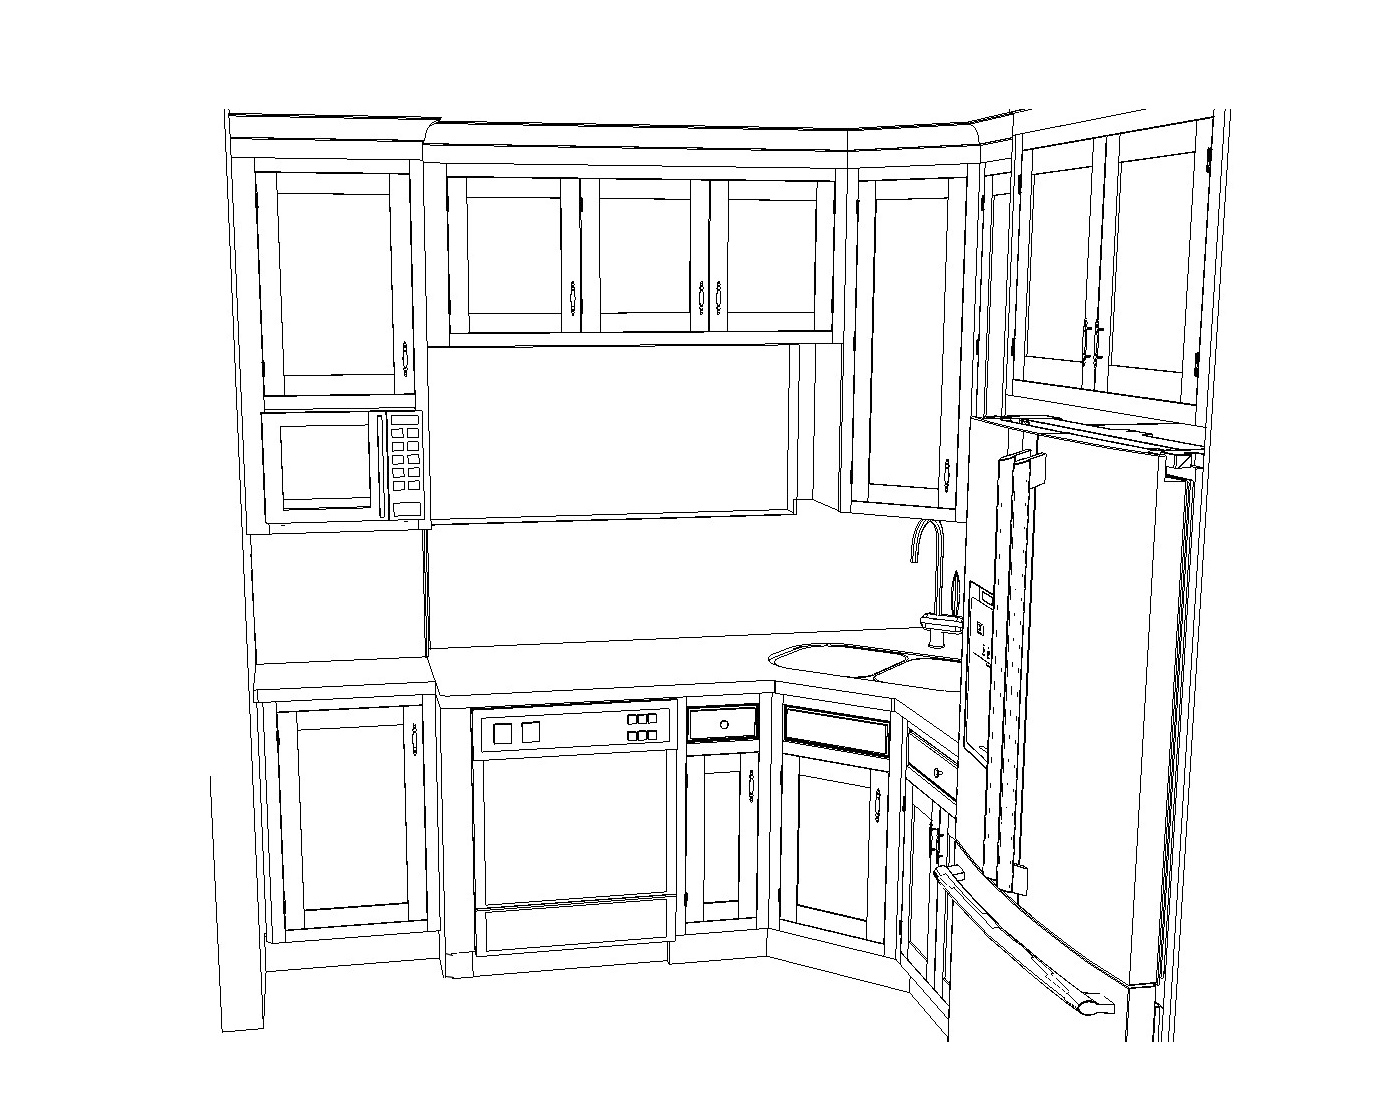 A drawing of a planned kitchen layout.